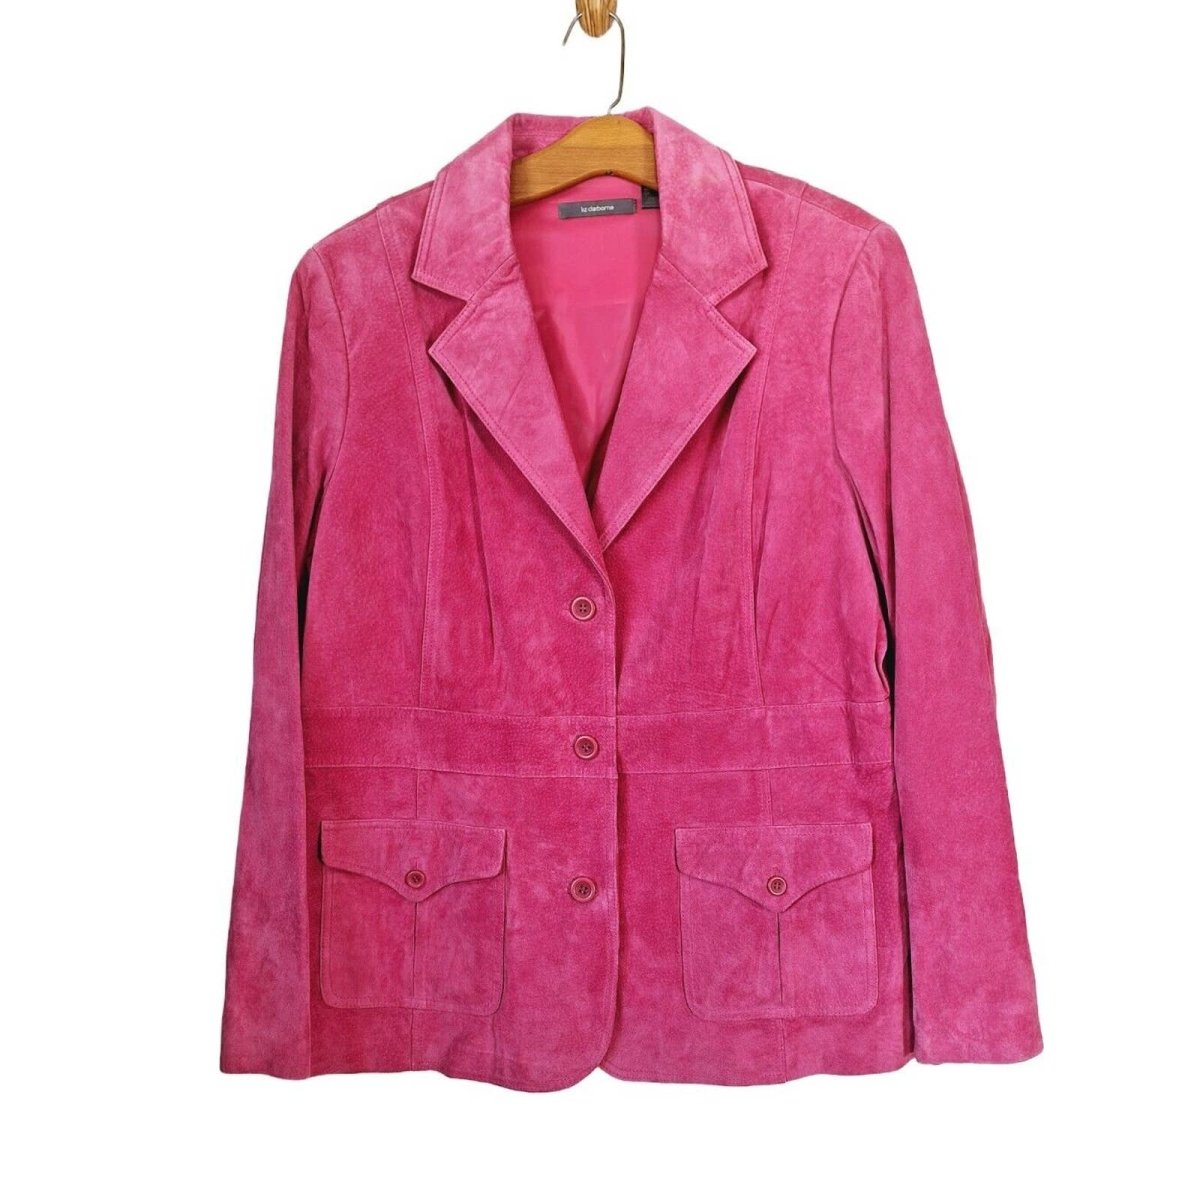 Y2K/Modern Bubblegum Pink Suede Leather Jacket Size XL- AS IS - themallvintage The Mall Vintage